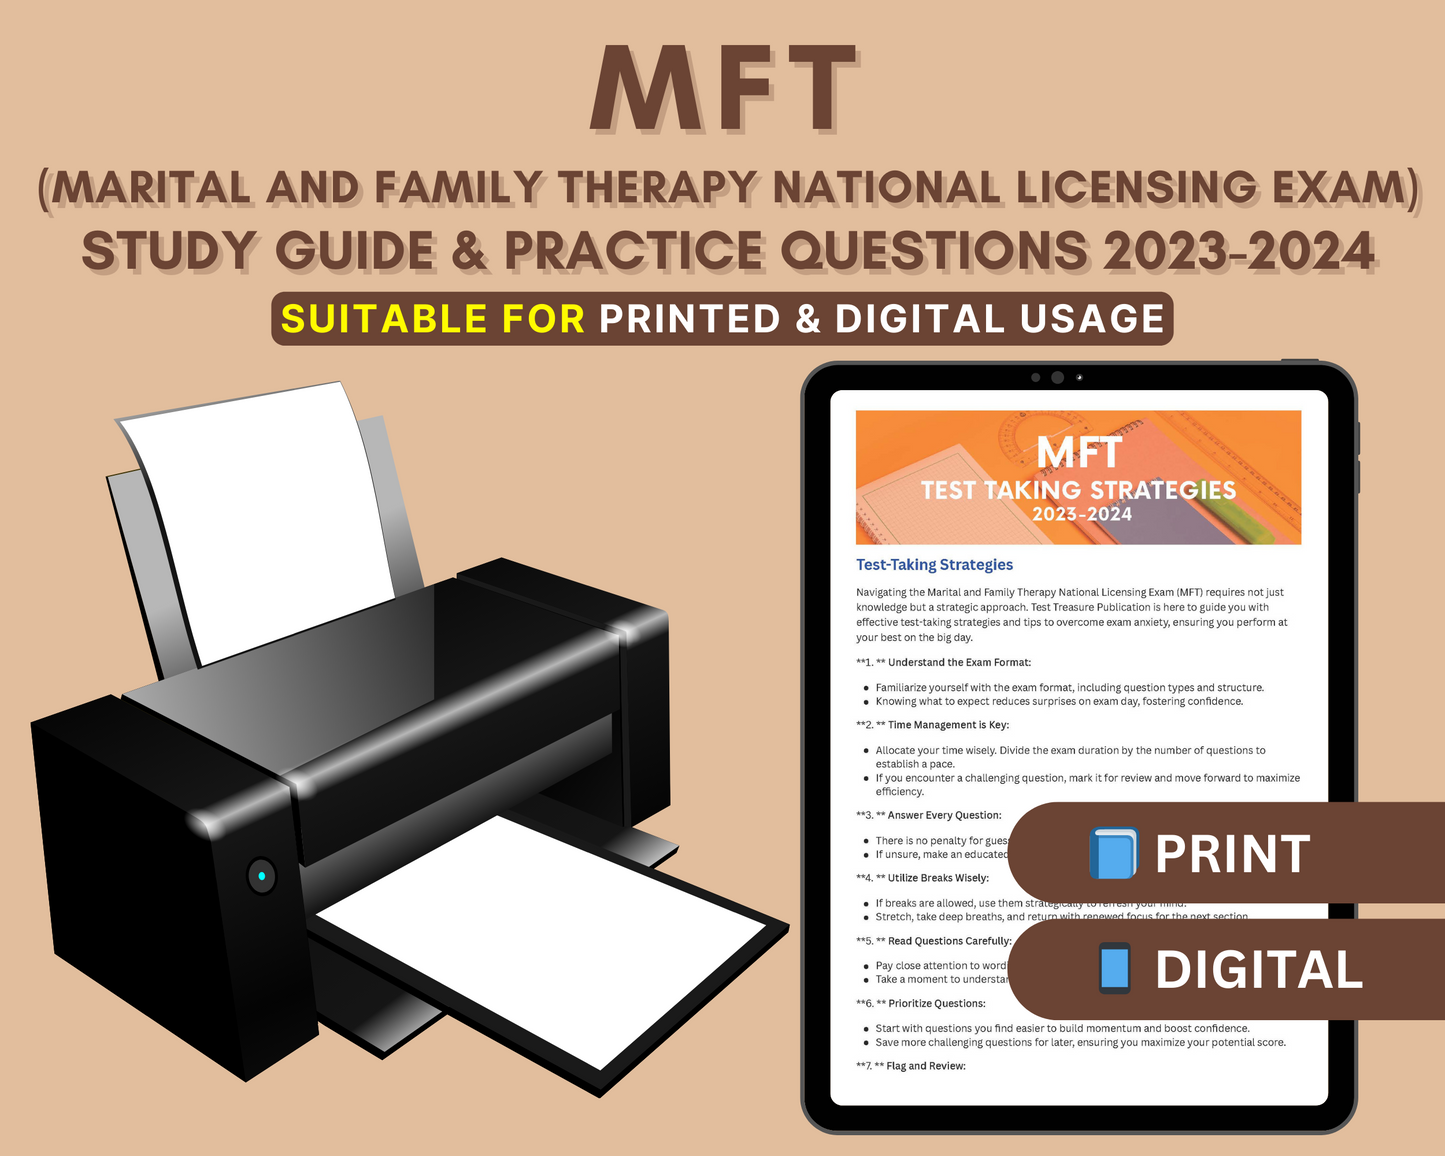 MFT Exam Study Guide 2023-2024: In-Depth Content Review, Practice Tests & Exam Strategies for Aspiring Therapists!